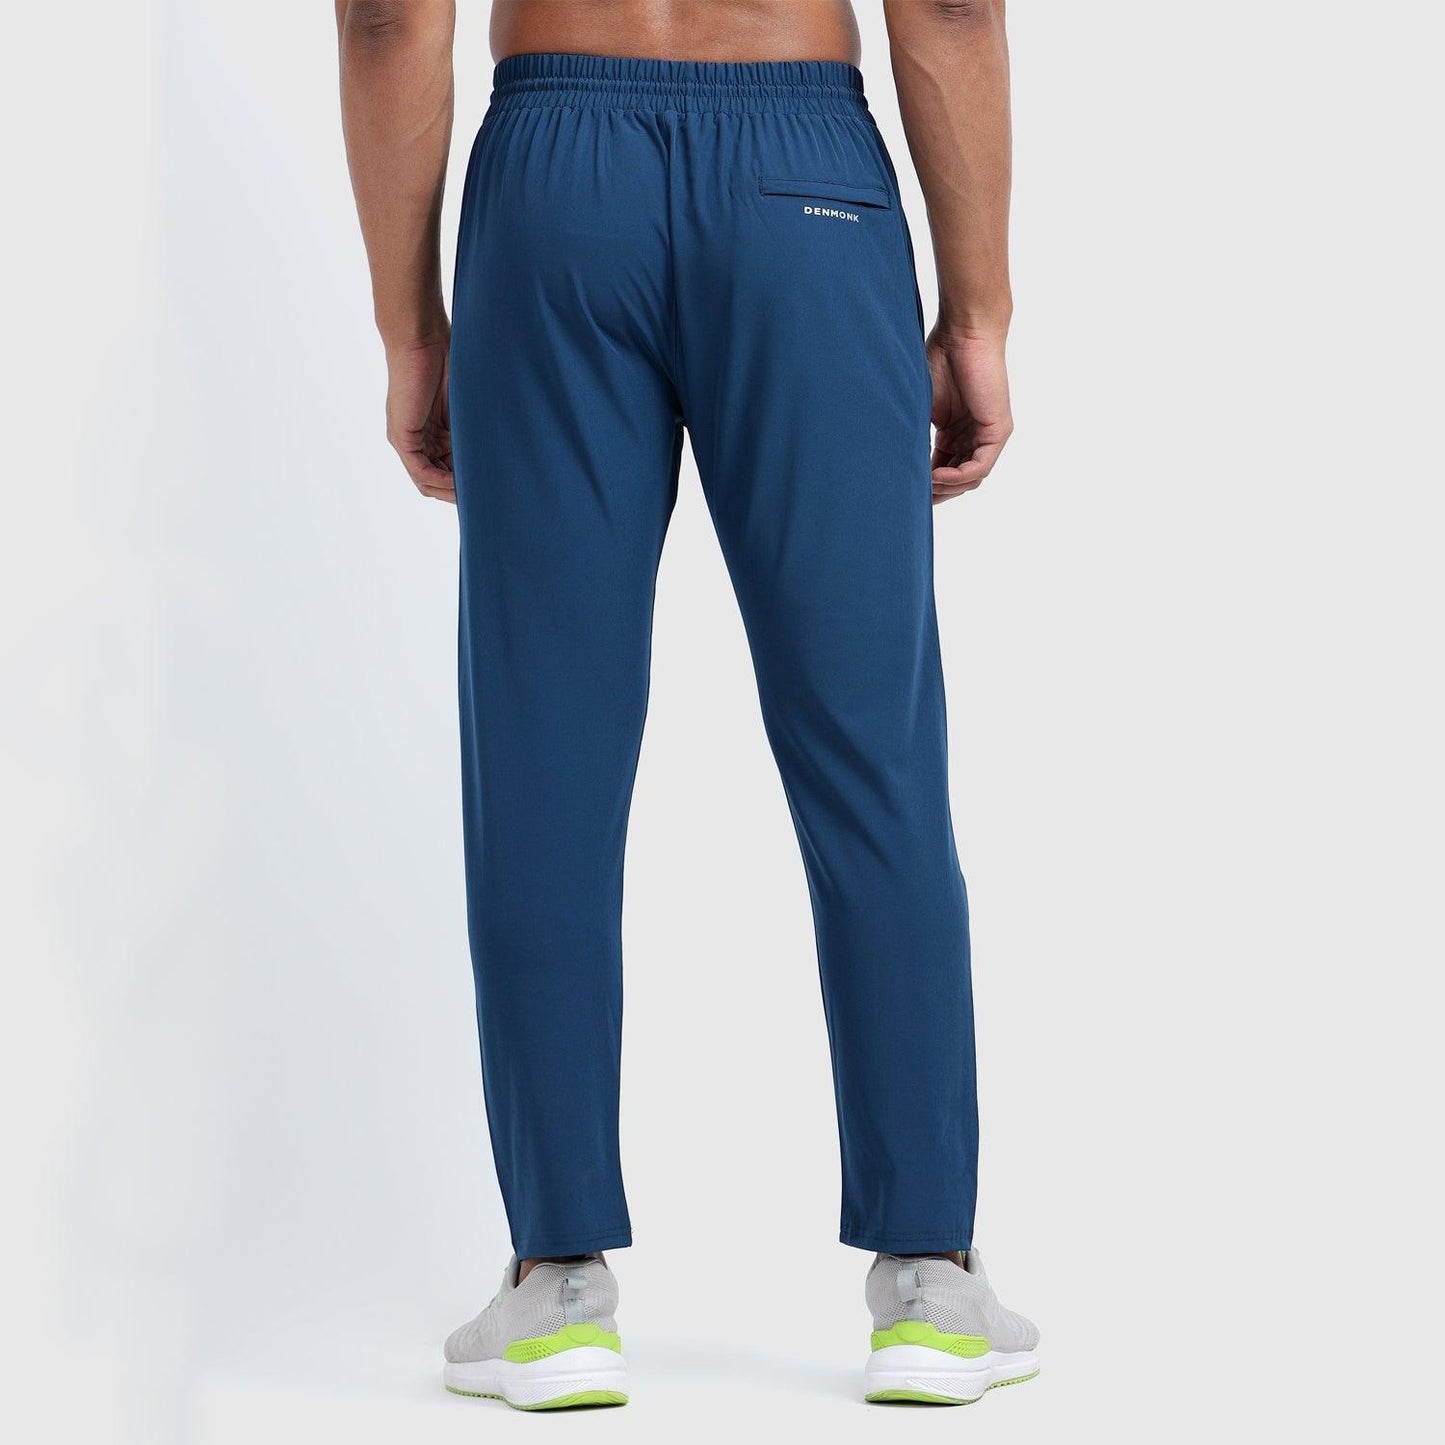 Denmonk: Elevate your look with these stayactive sharp regal blue Trackpant for mens.